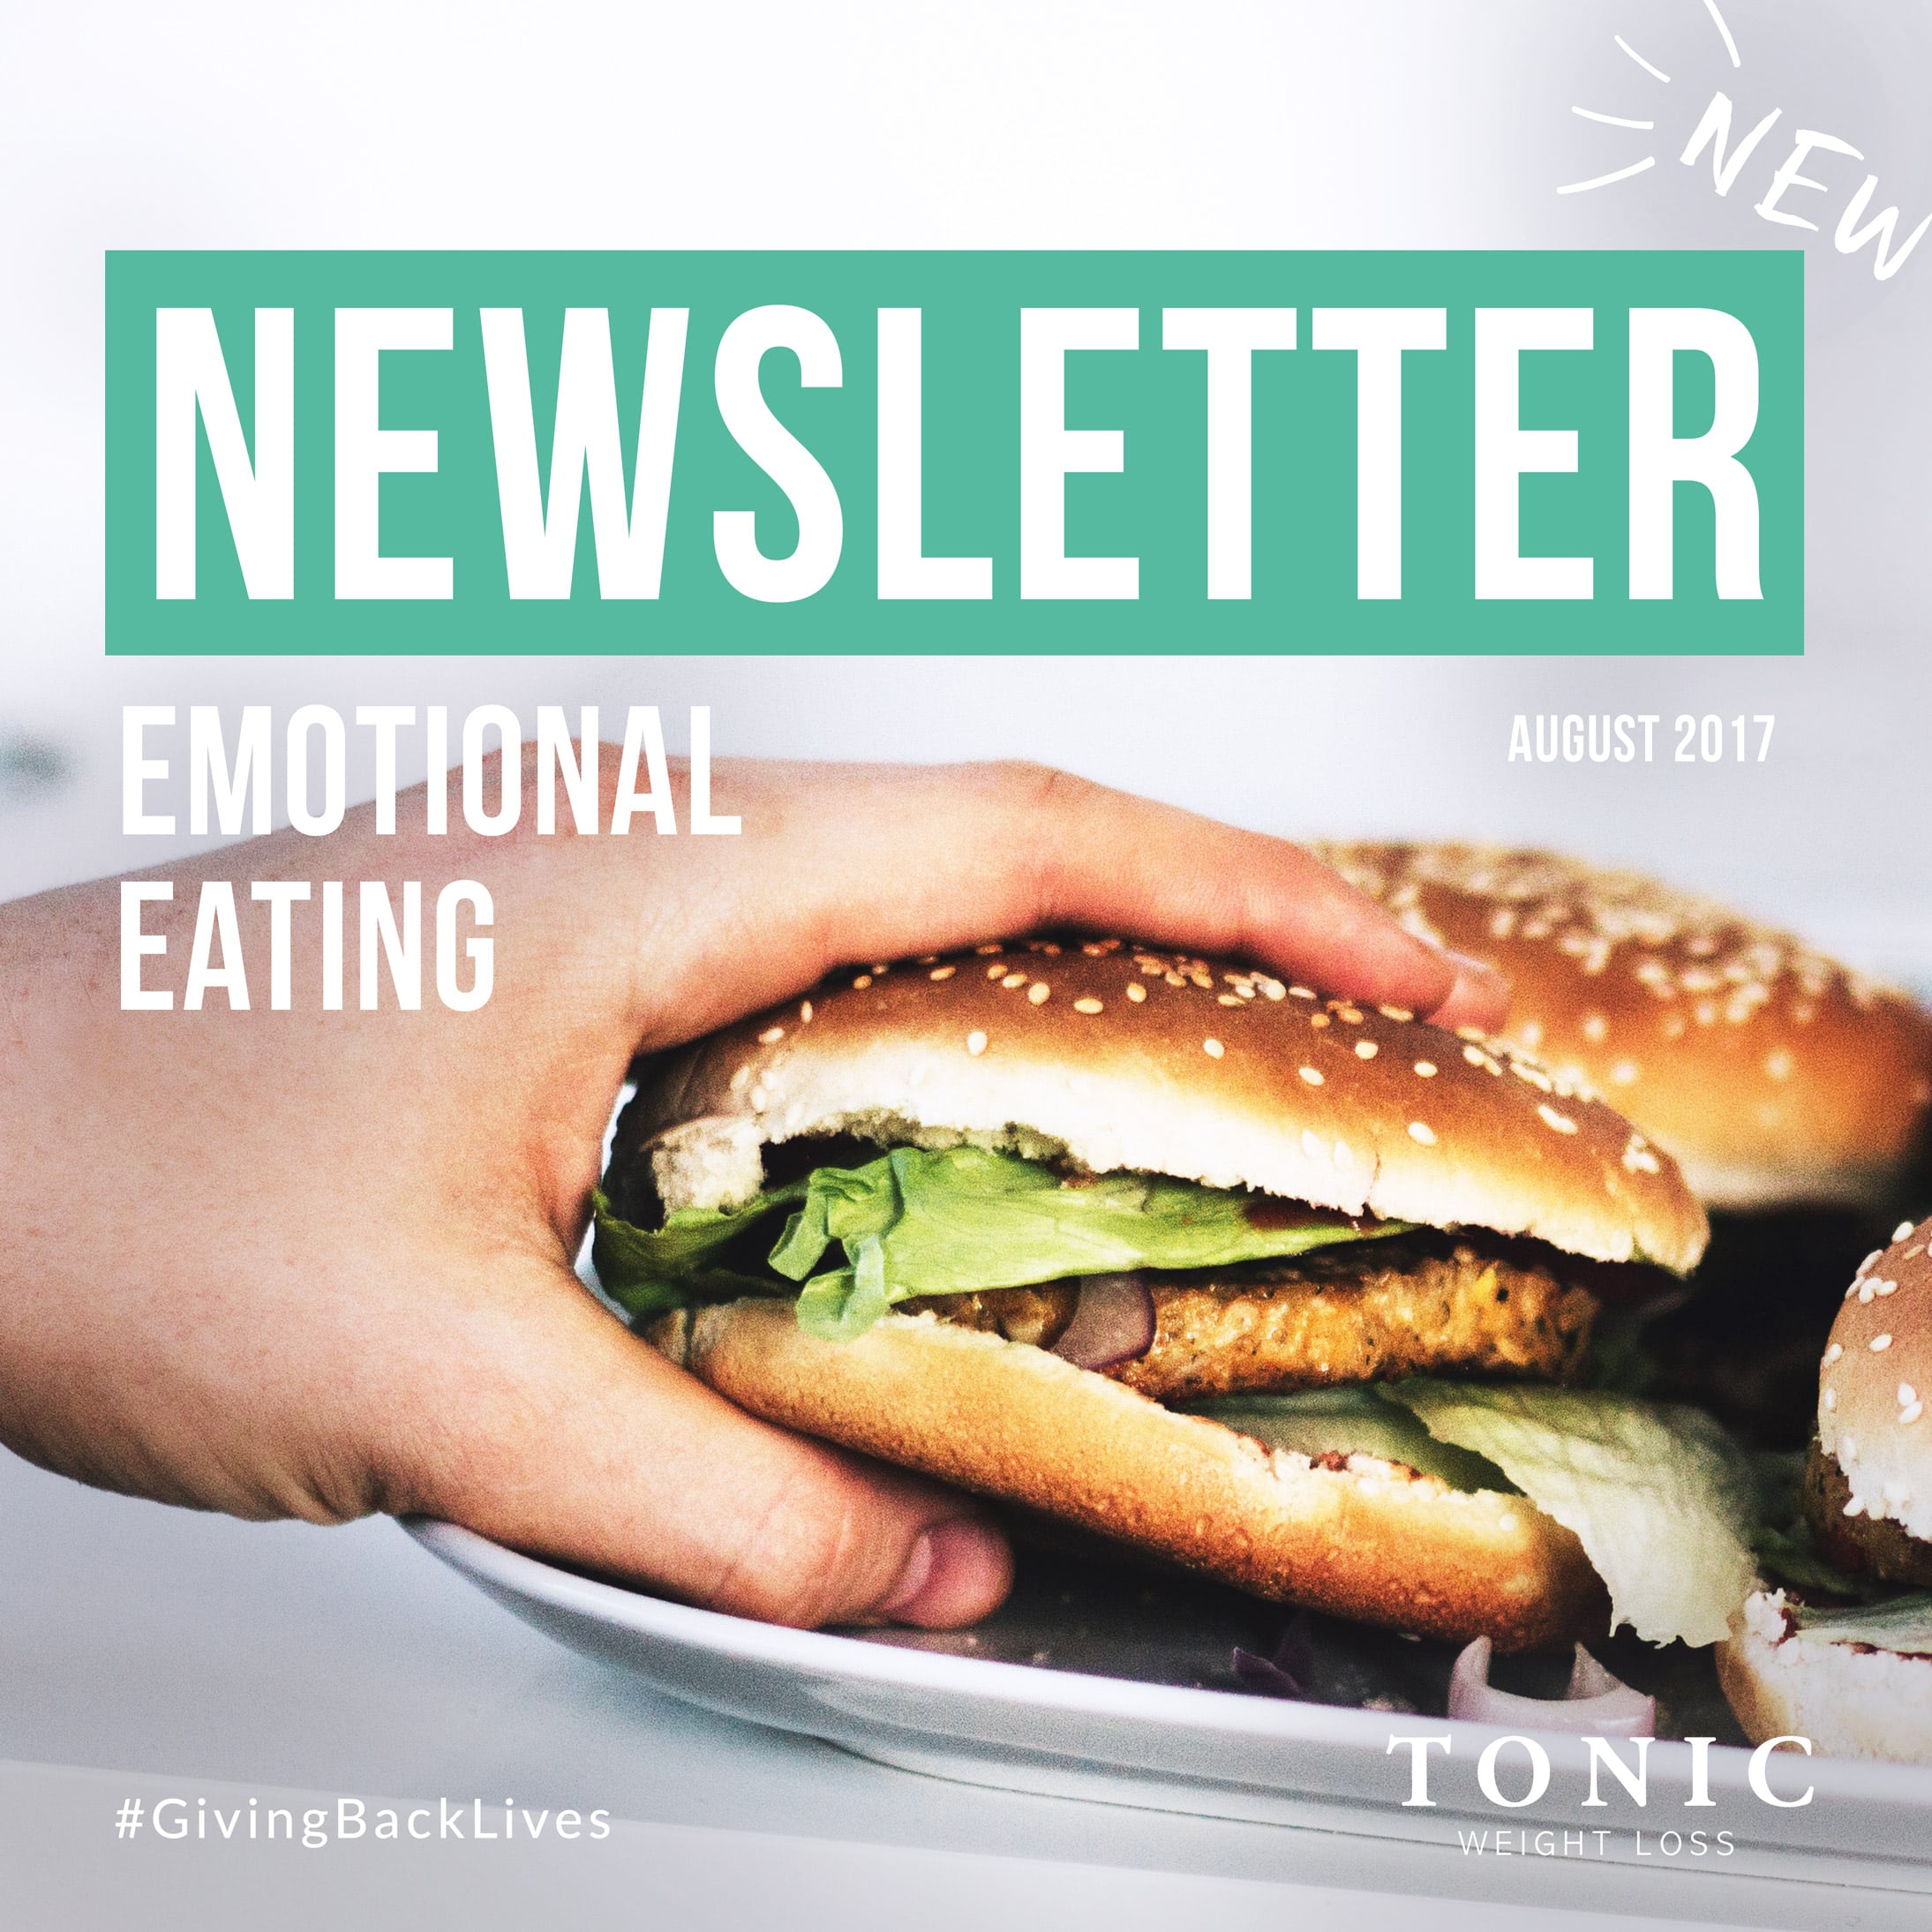 Tonic-Newsletter-emotional-eating-fat-weight-loss-surgery-